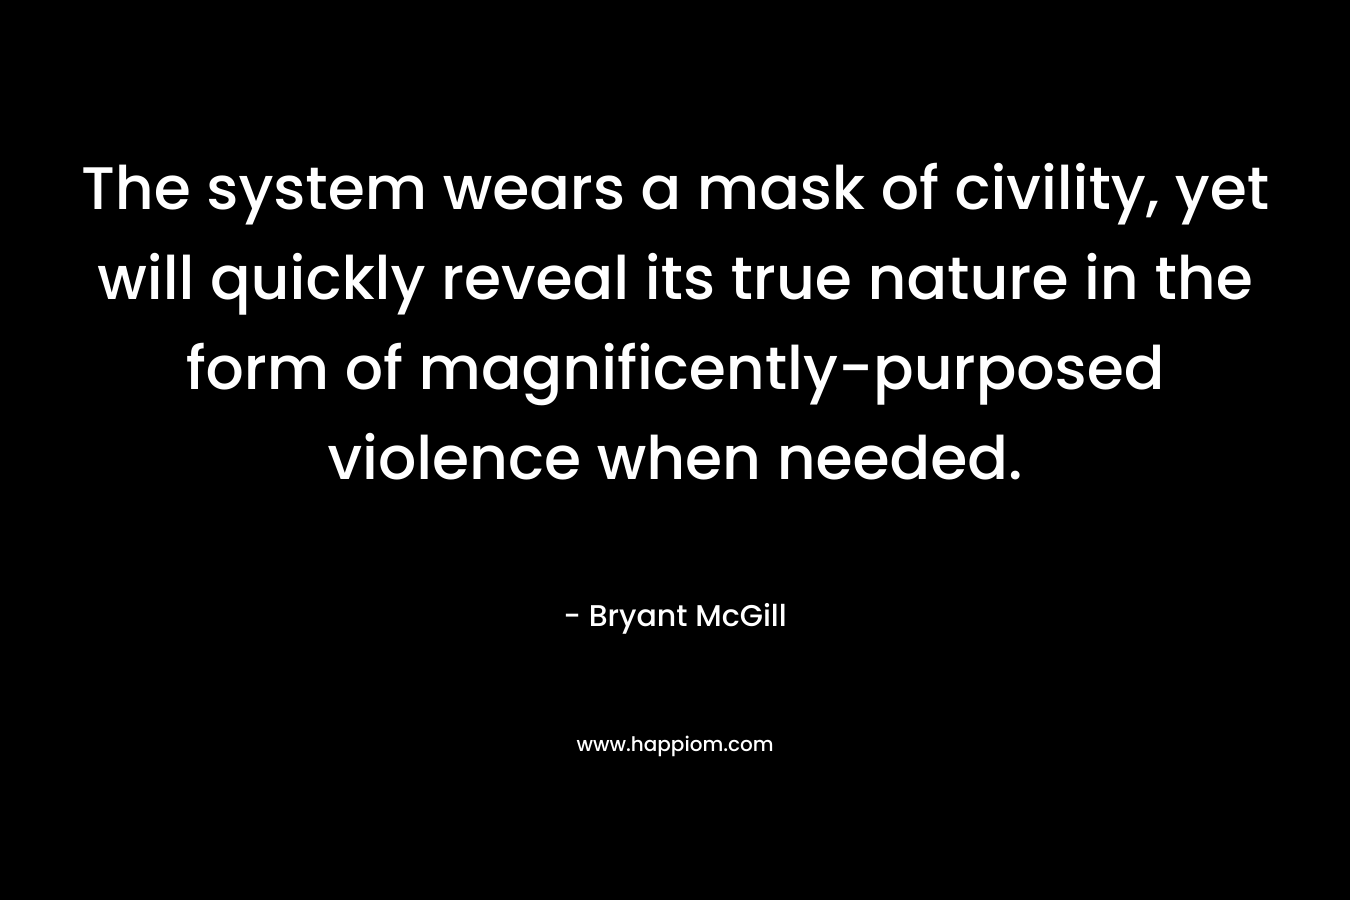 The system wears a mask of civility, yet will quickly reveal its true nature in the form of magnificently-purposed violence when needed. – Bryant McGill